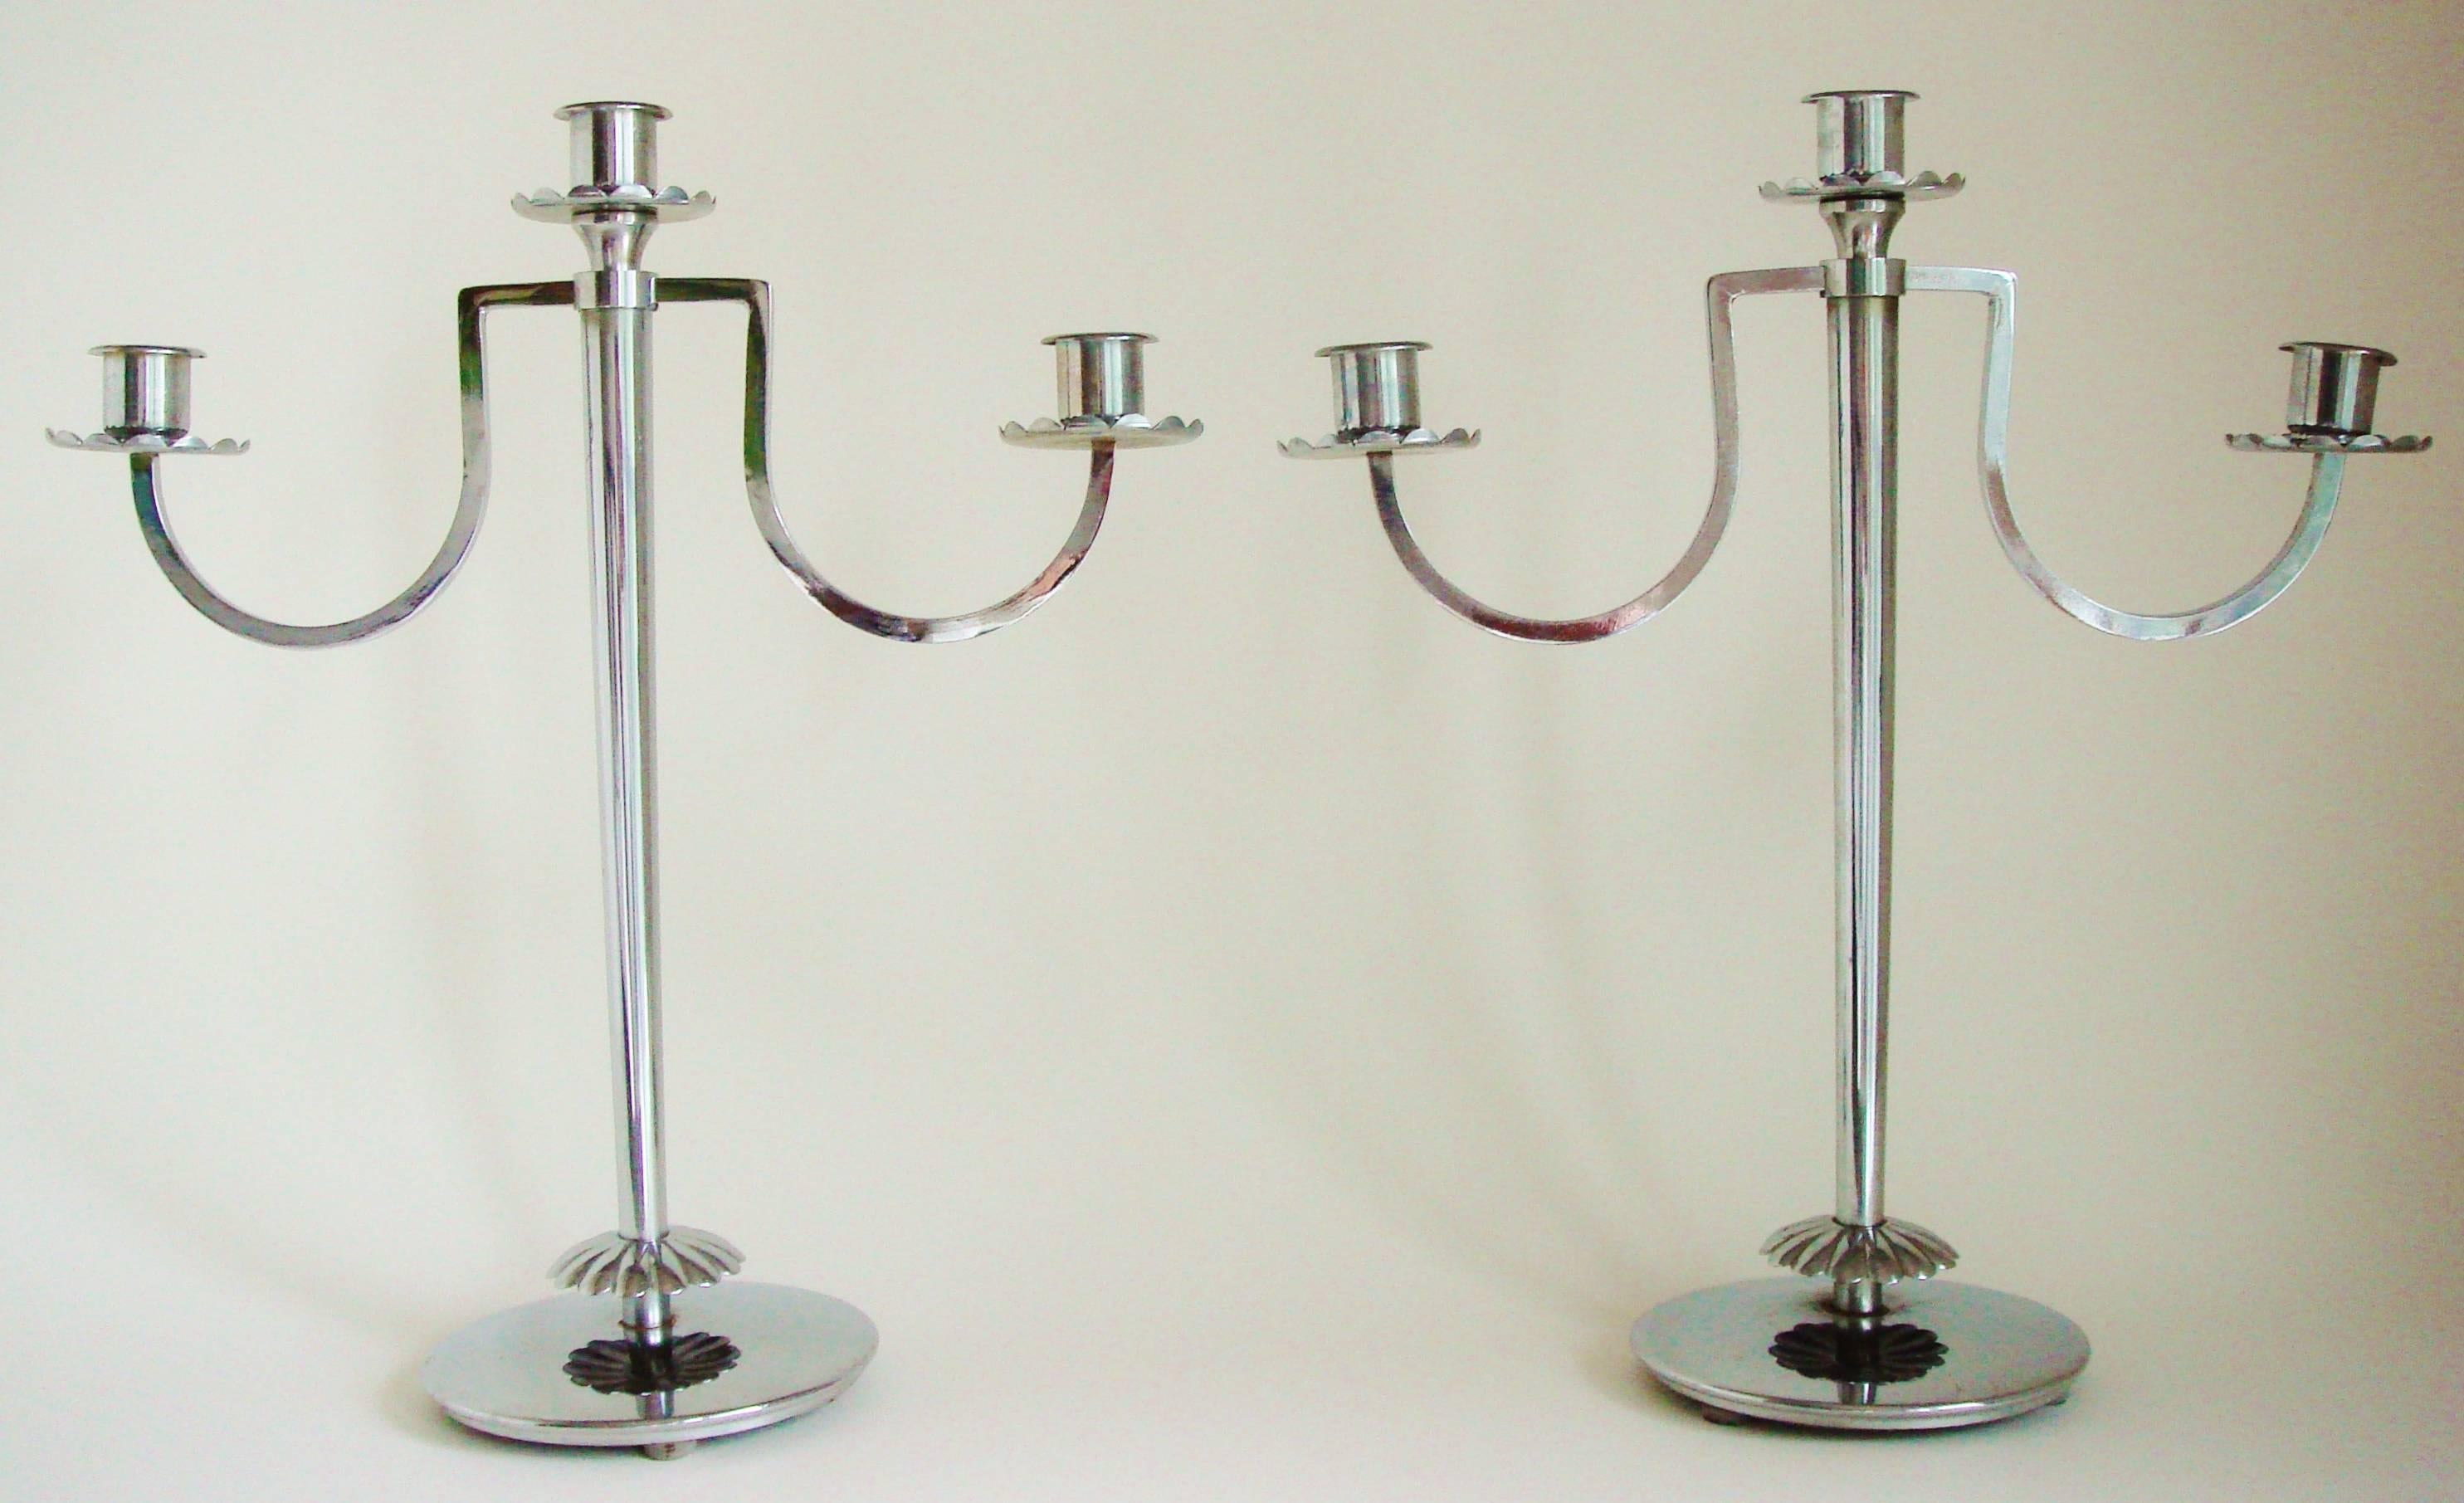 This beautiful pair of American Art Deco polished chrome Diana triple candleholders were designed by Harry Laylon for the Chase Brass and Copper Company Inc. of Waterbury, Connecticut. They were featured in the Chase Specialties catalogues from 1936